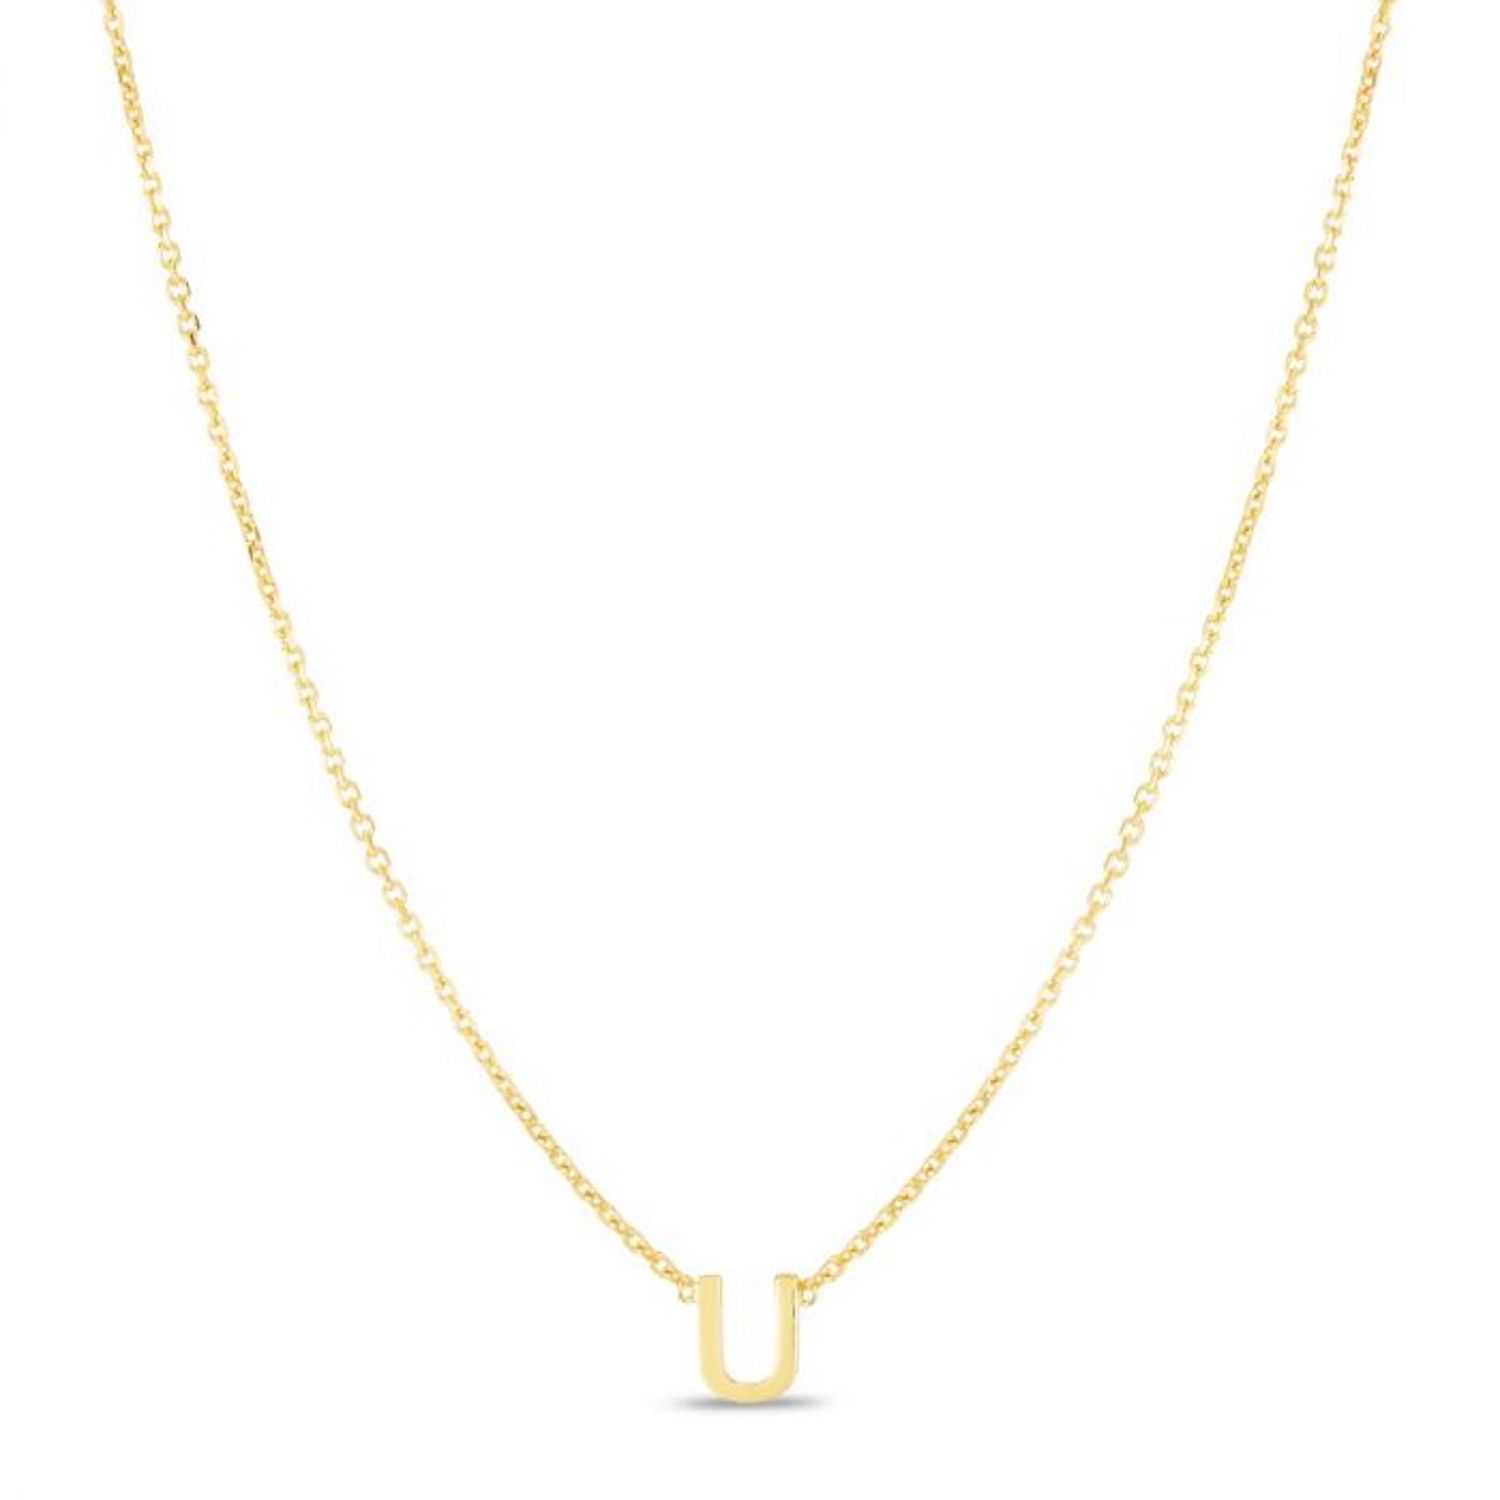 14K Yellow Gold Letter Initials Pendant Necklace 16"-18" - U